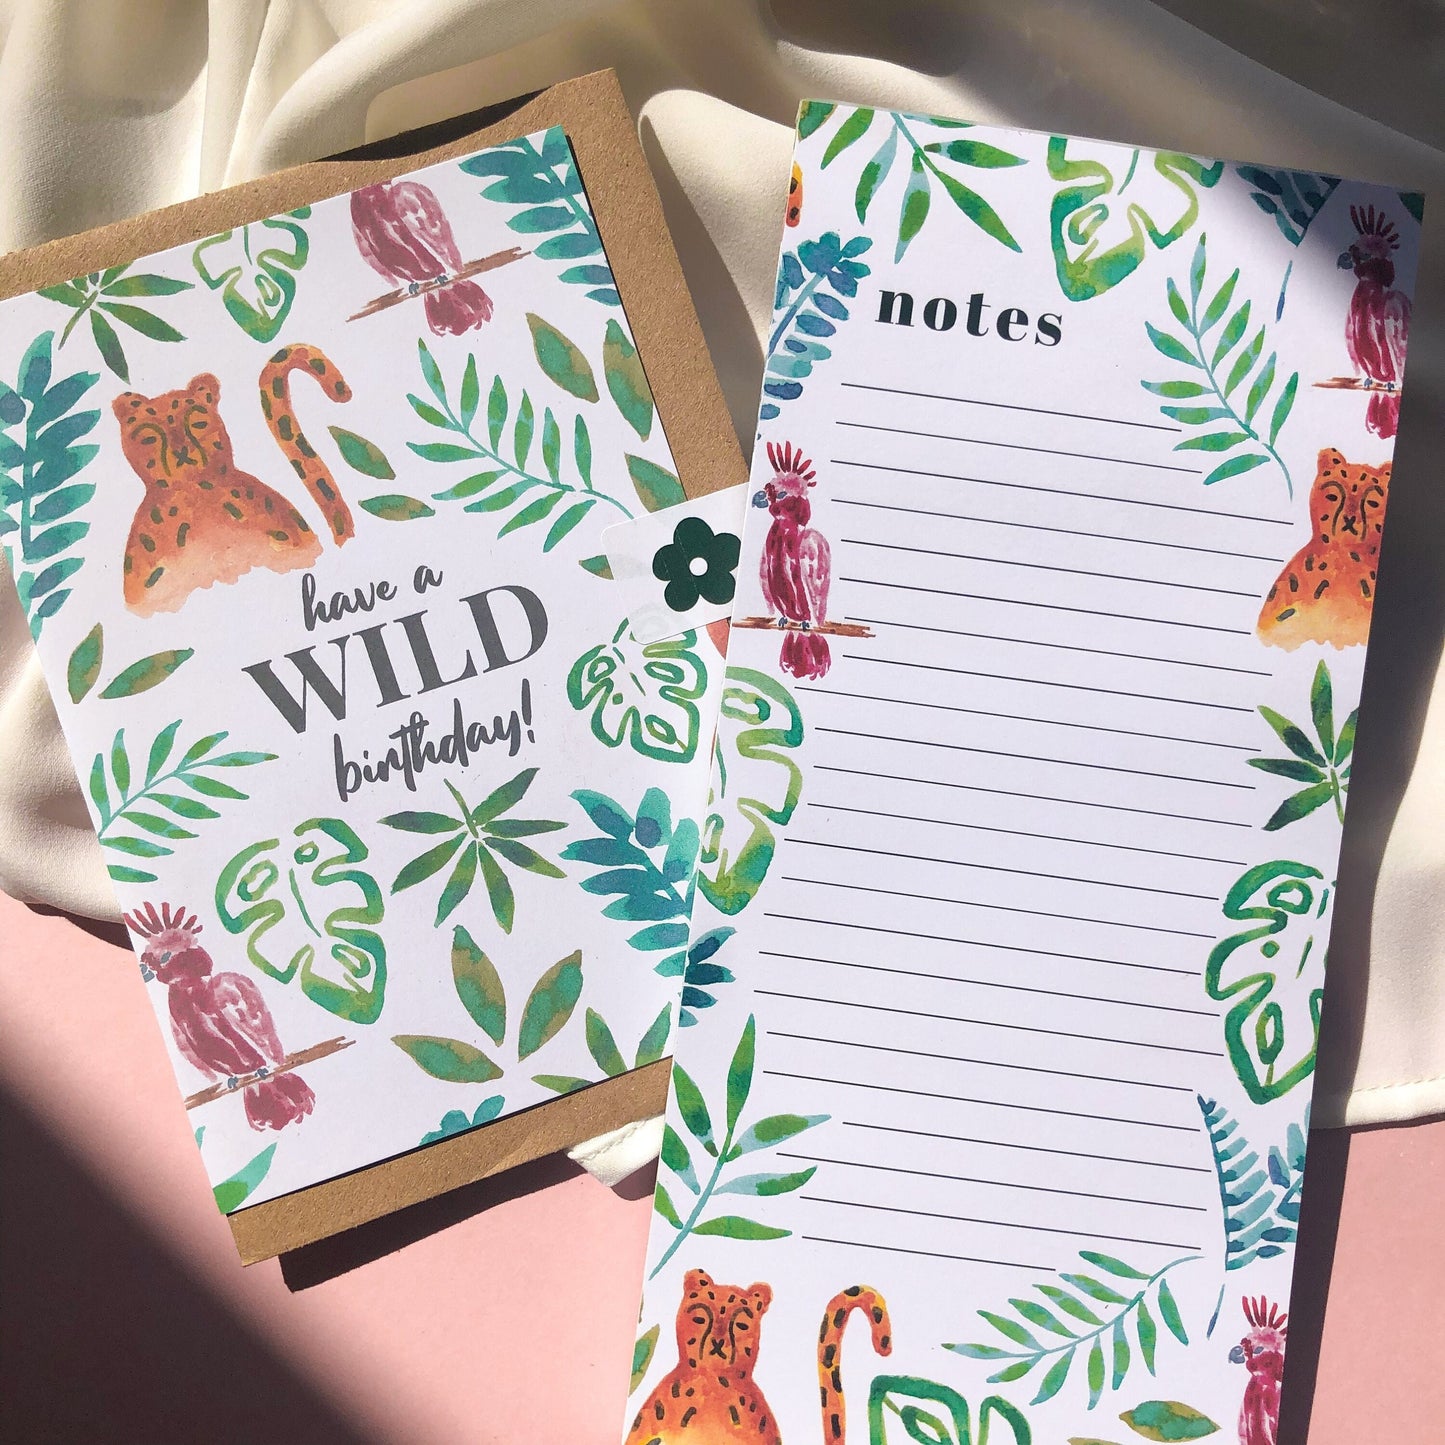 ATropical Stationery Birthday Gift Set: Have a WILD Birthday, Jungle Illustration Notepad To Do List Memo Pad, 50 Pages - Animal Lover Gift